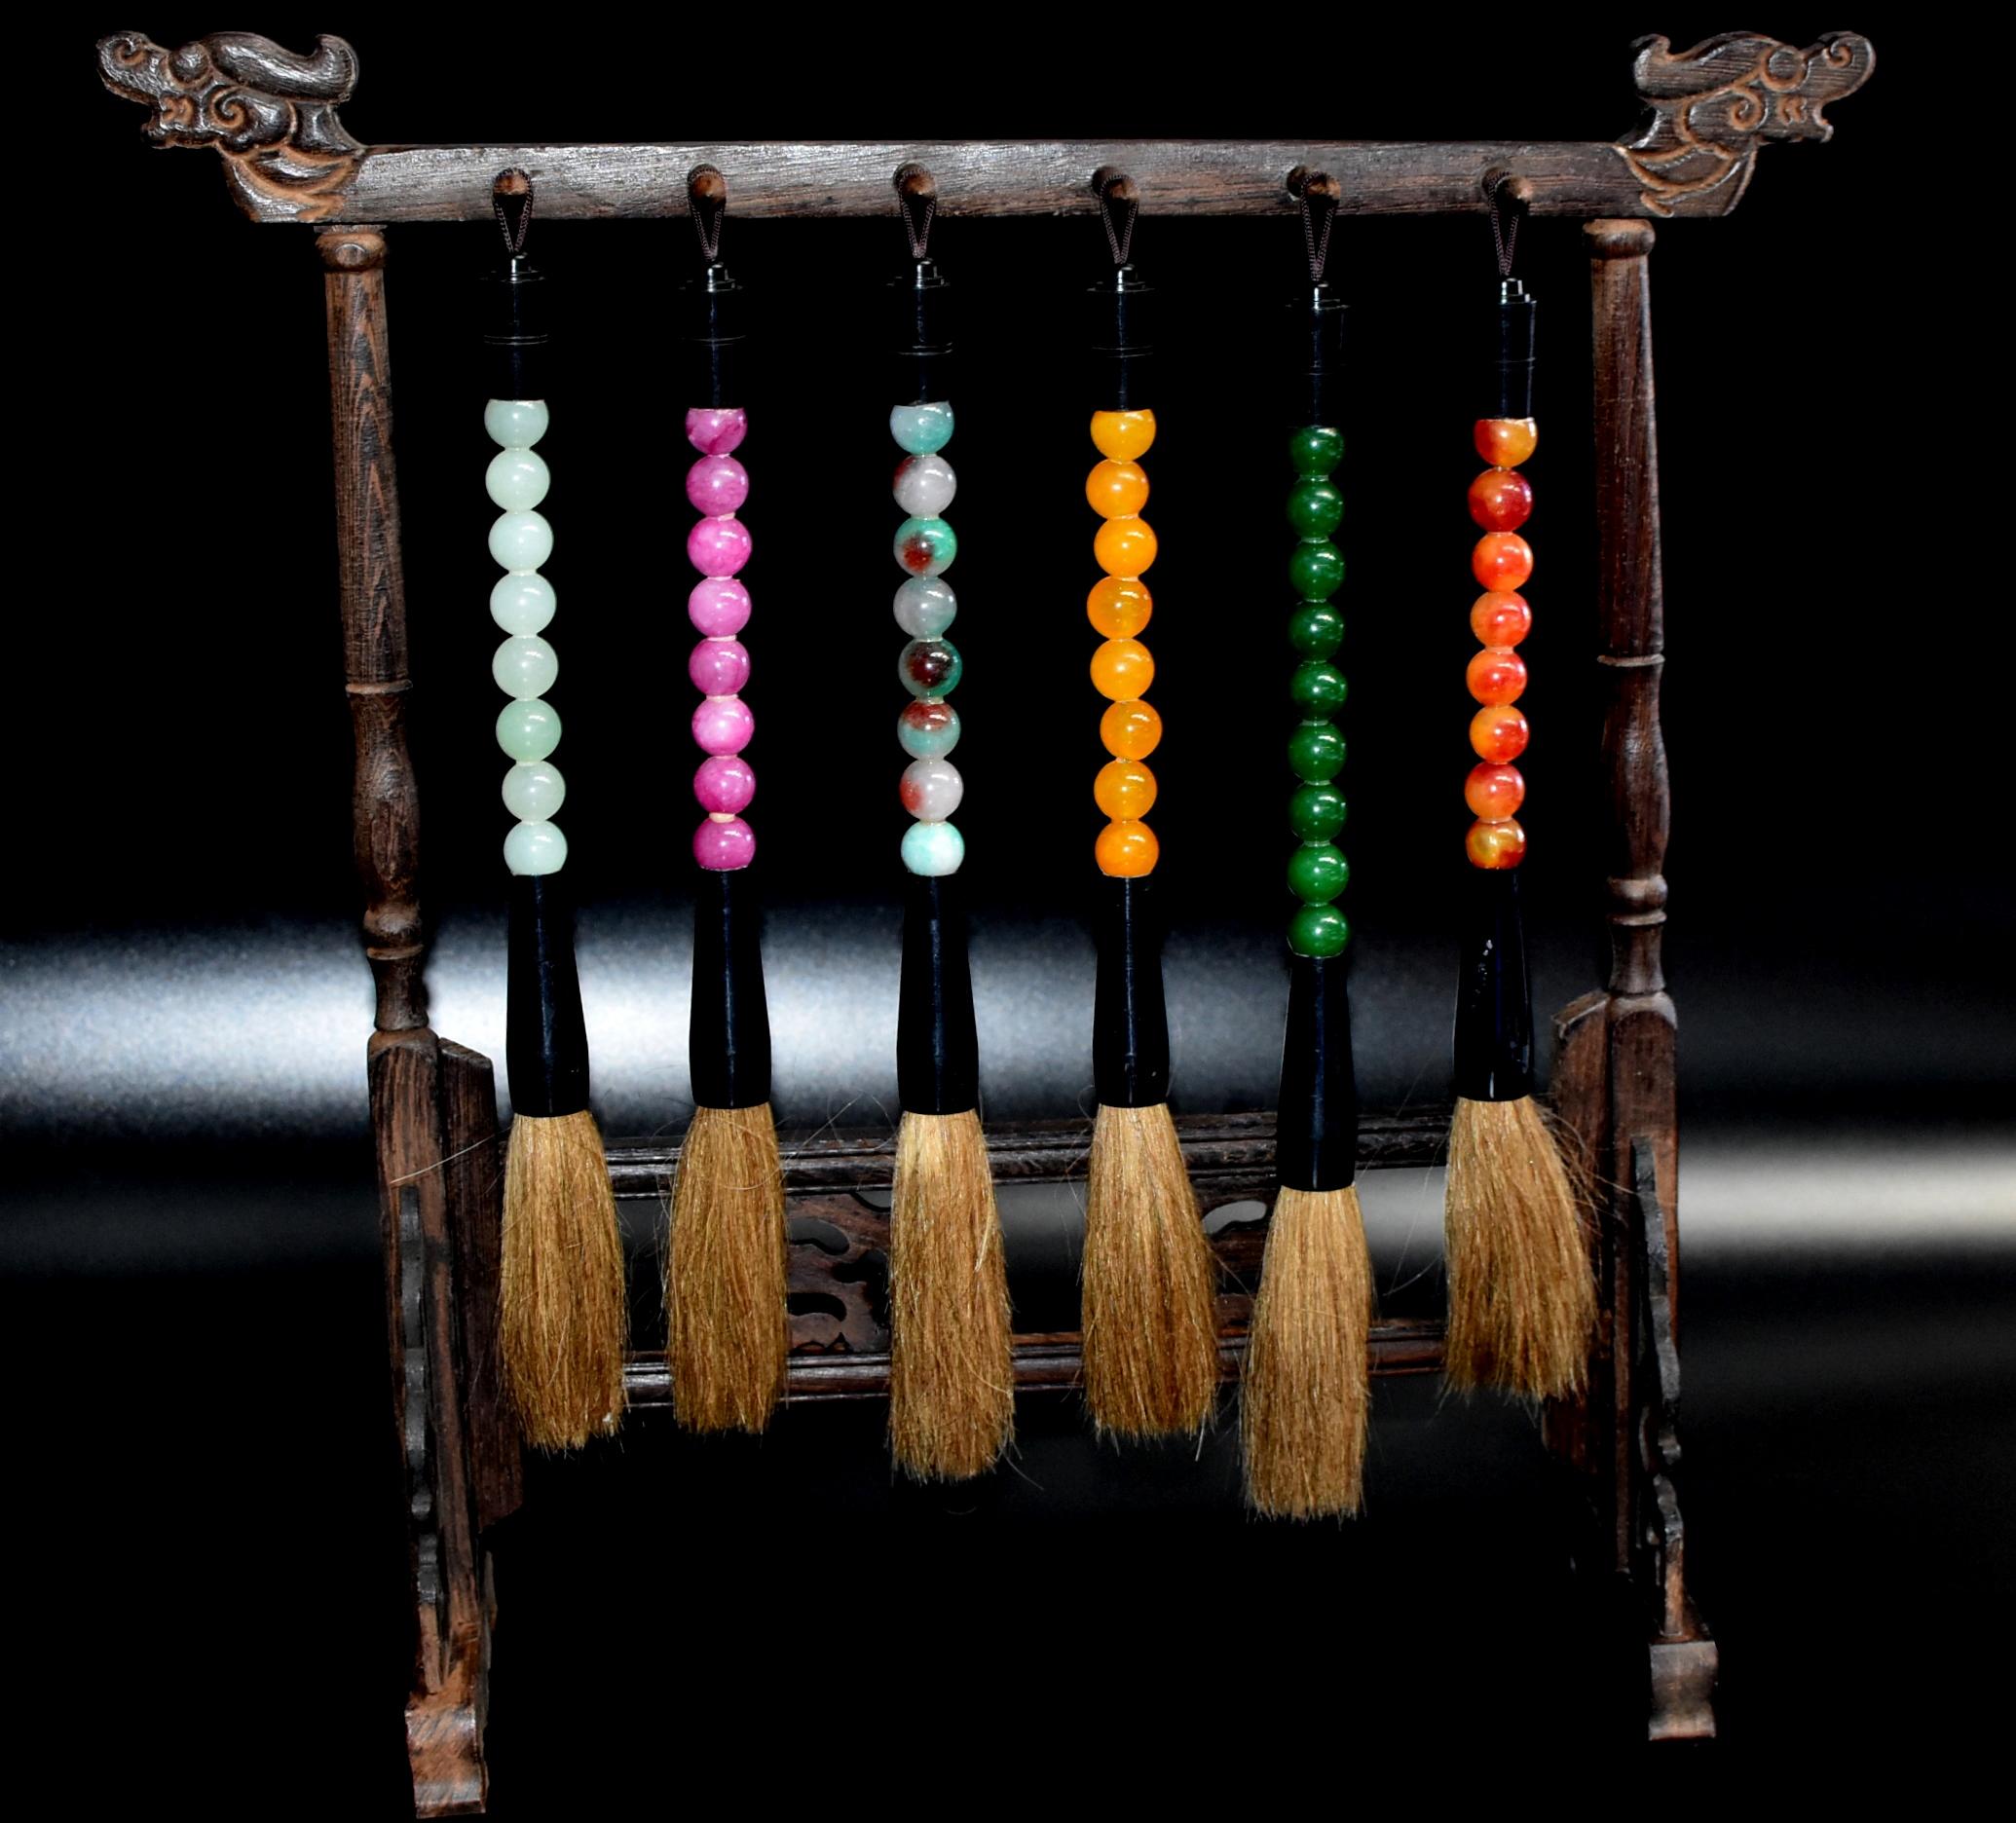 Beautiful set of 6 Chinese calligraphy brushes with genuine quartz balls dyed in 6 different colors. Brushes are handmade with horse hair. Stand not included but available for purchase in our store front.